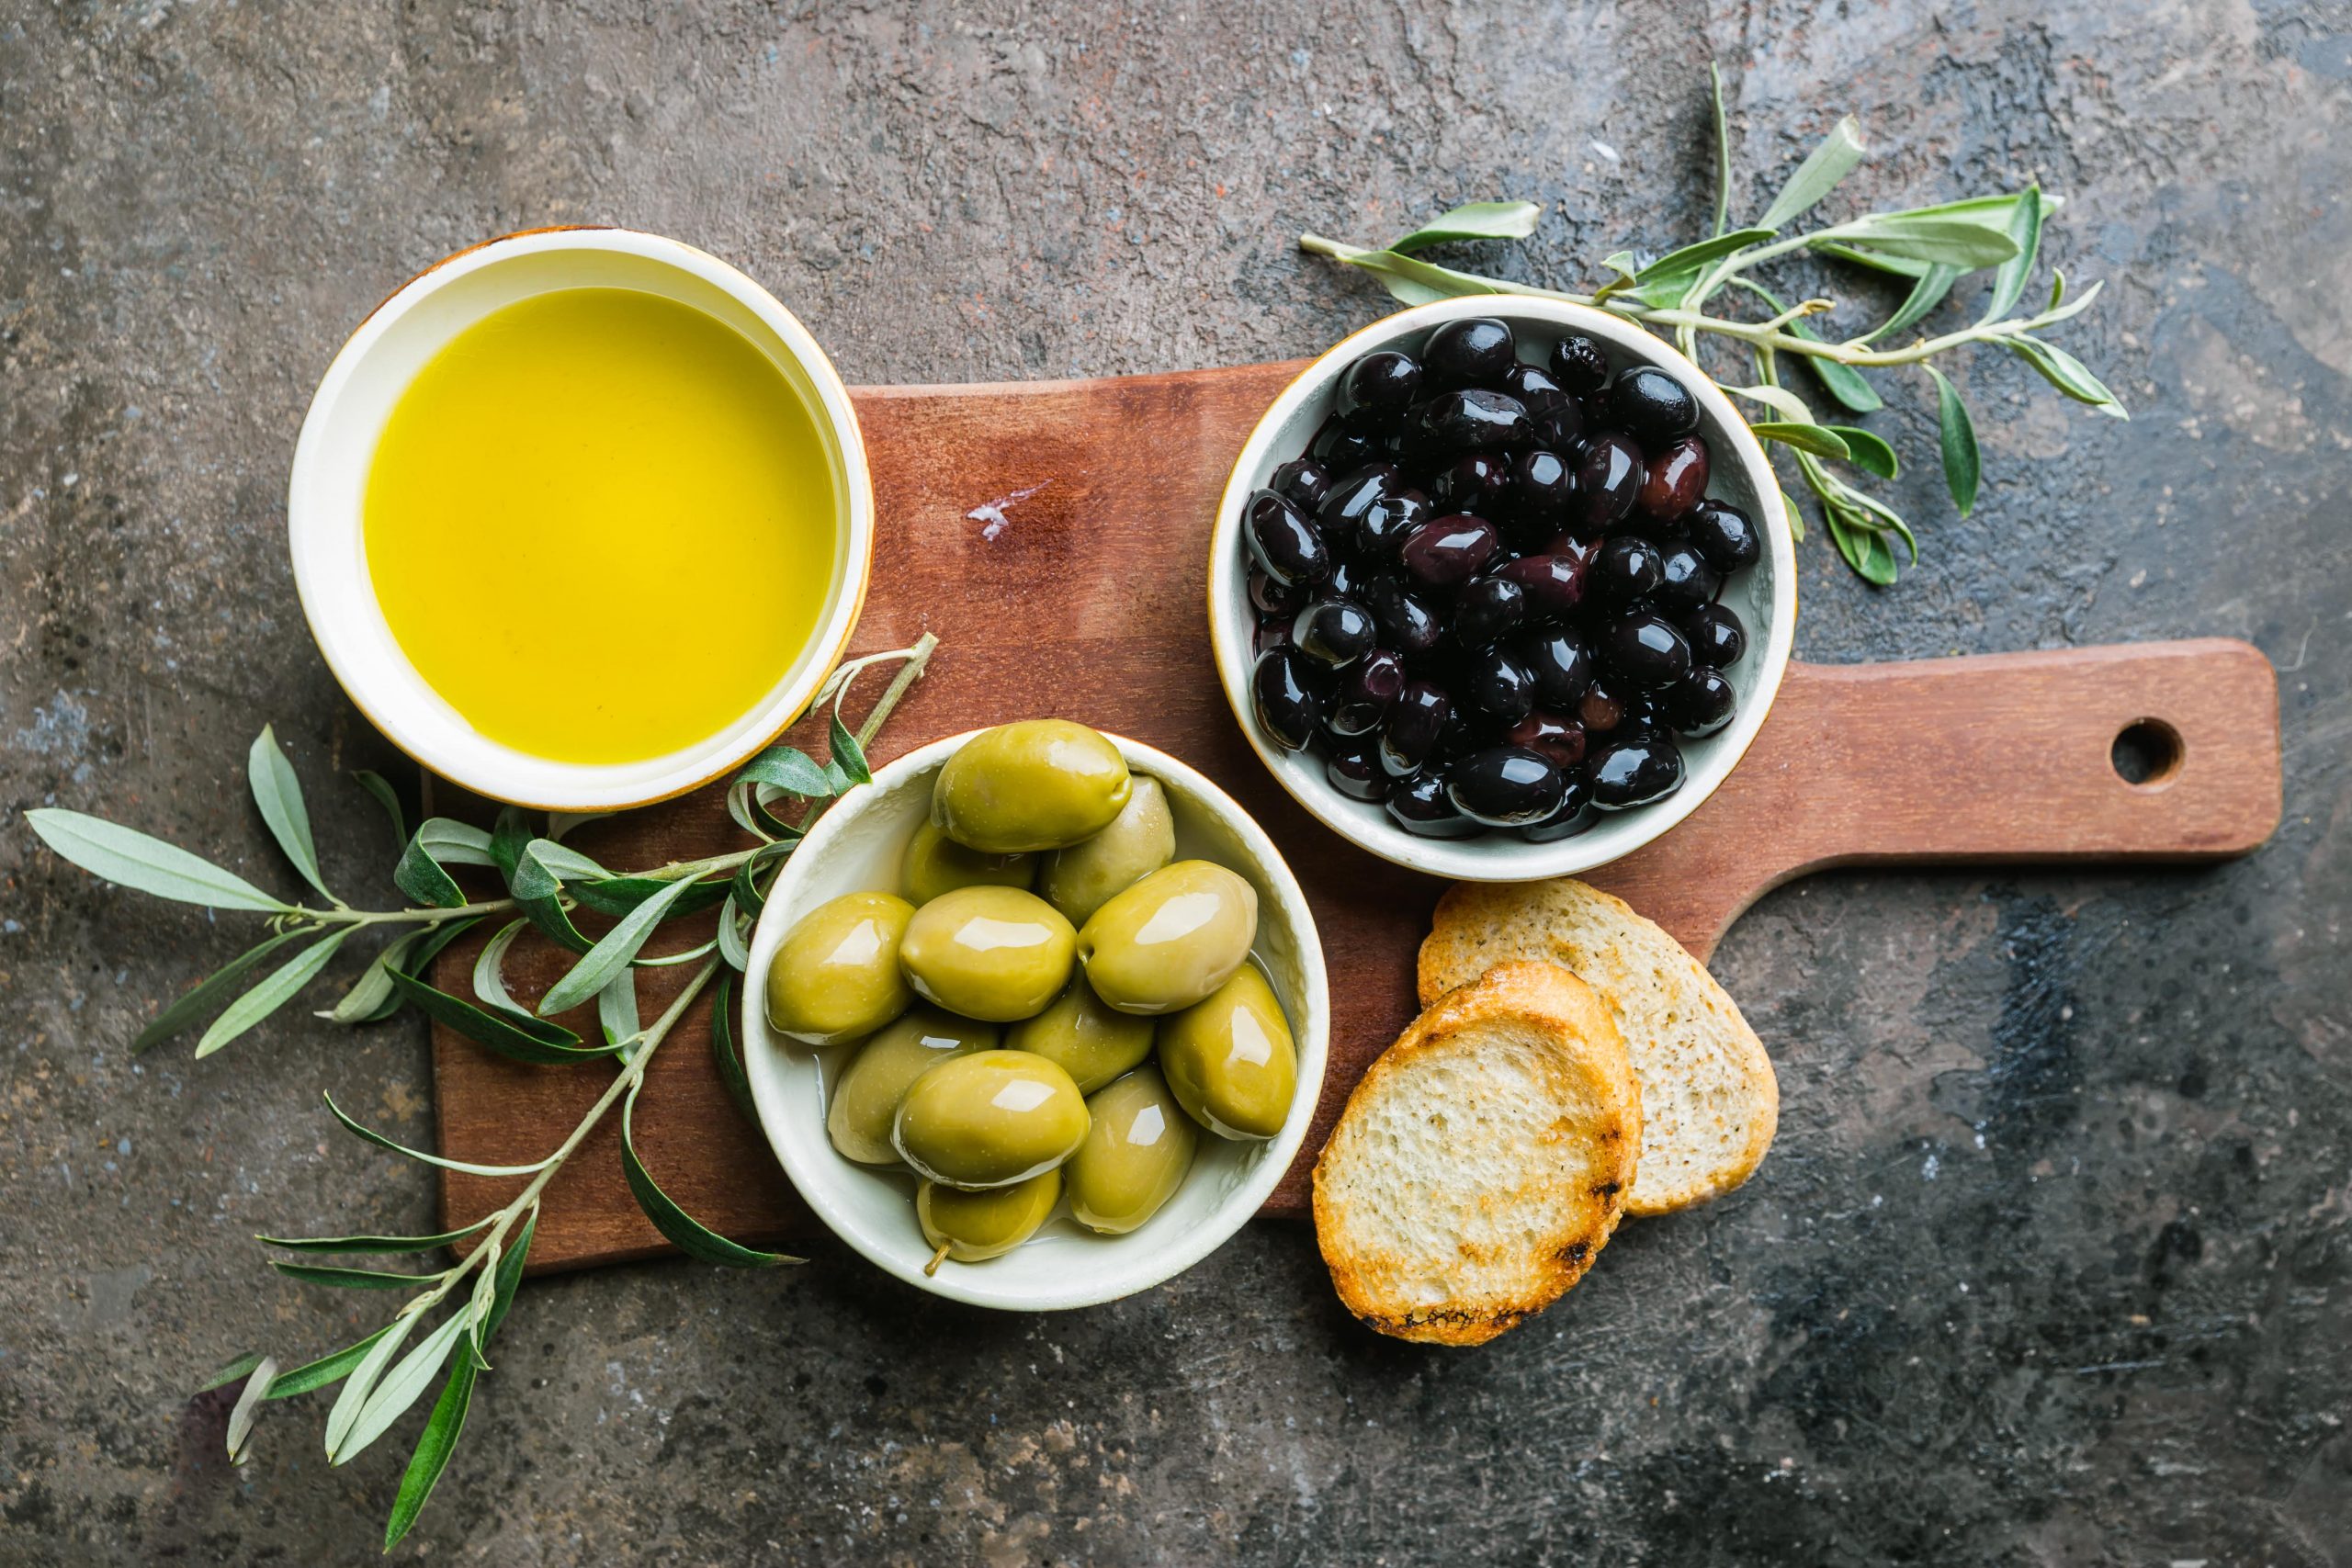 Different Types of Olives in Spain